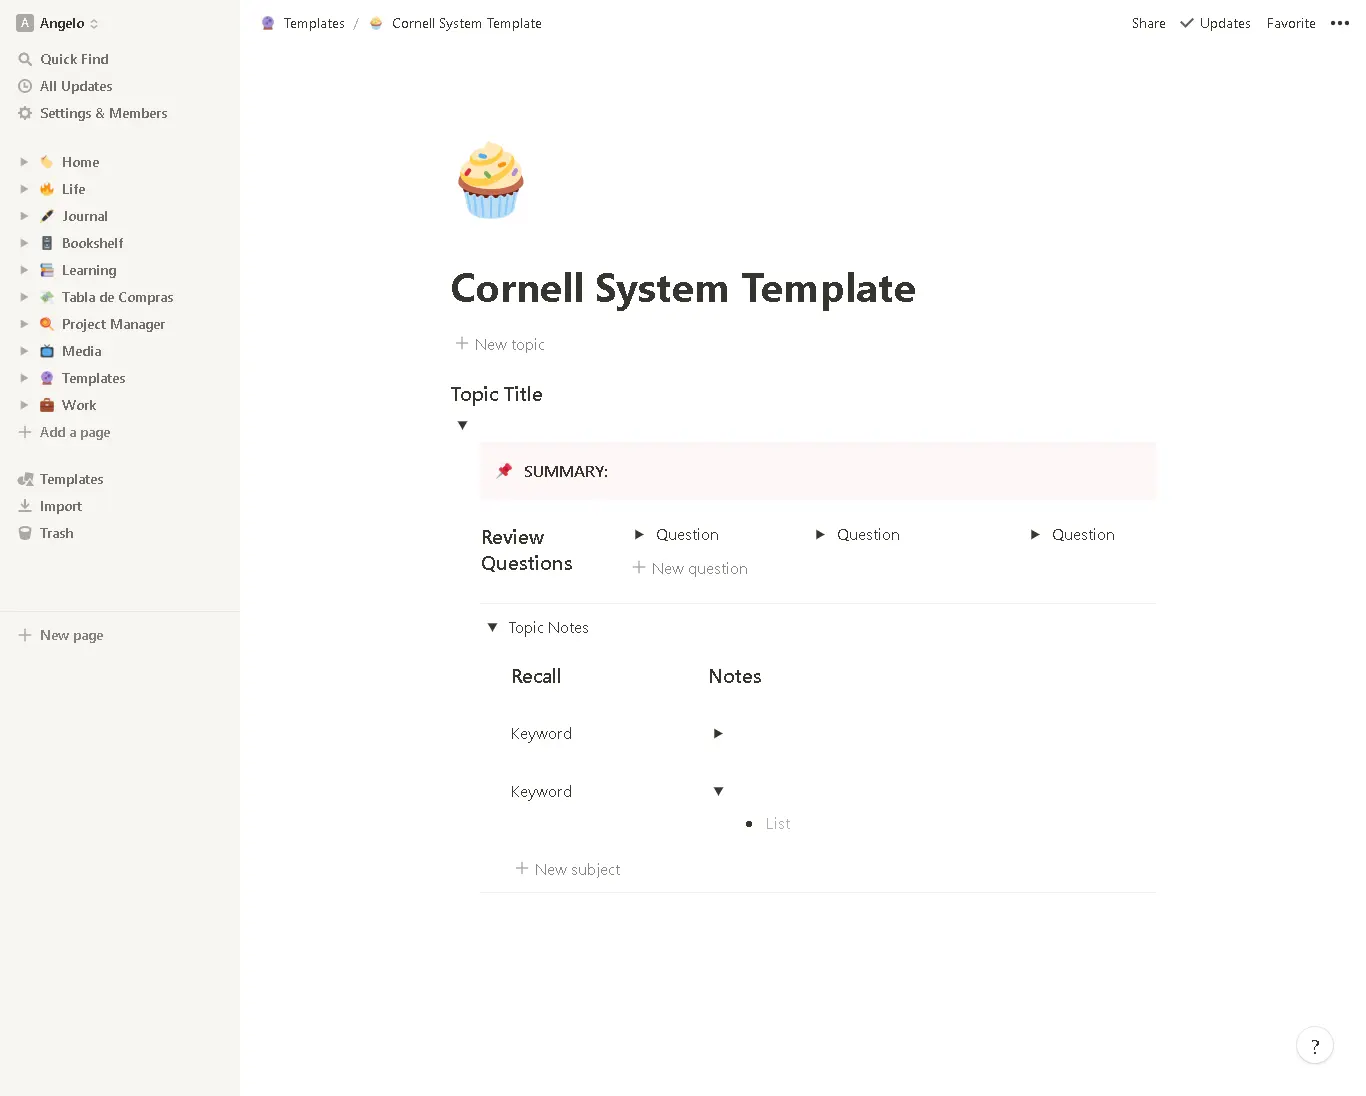 Cornell System Template image